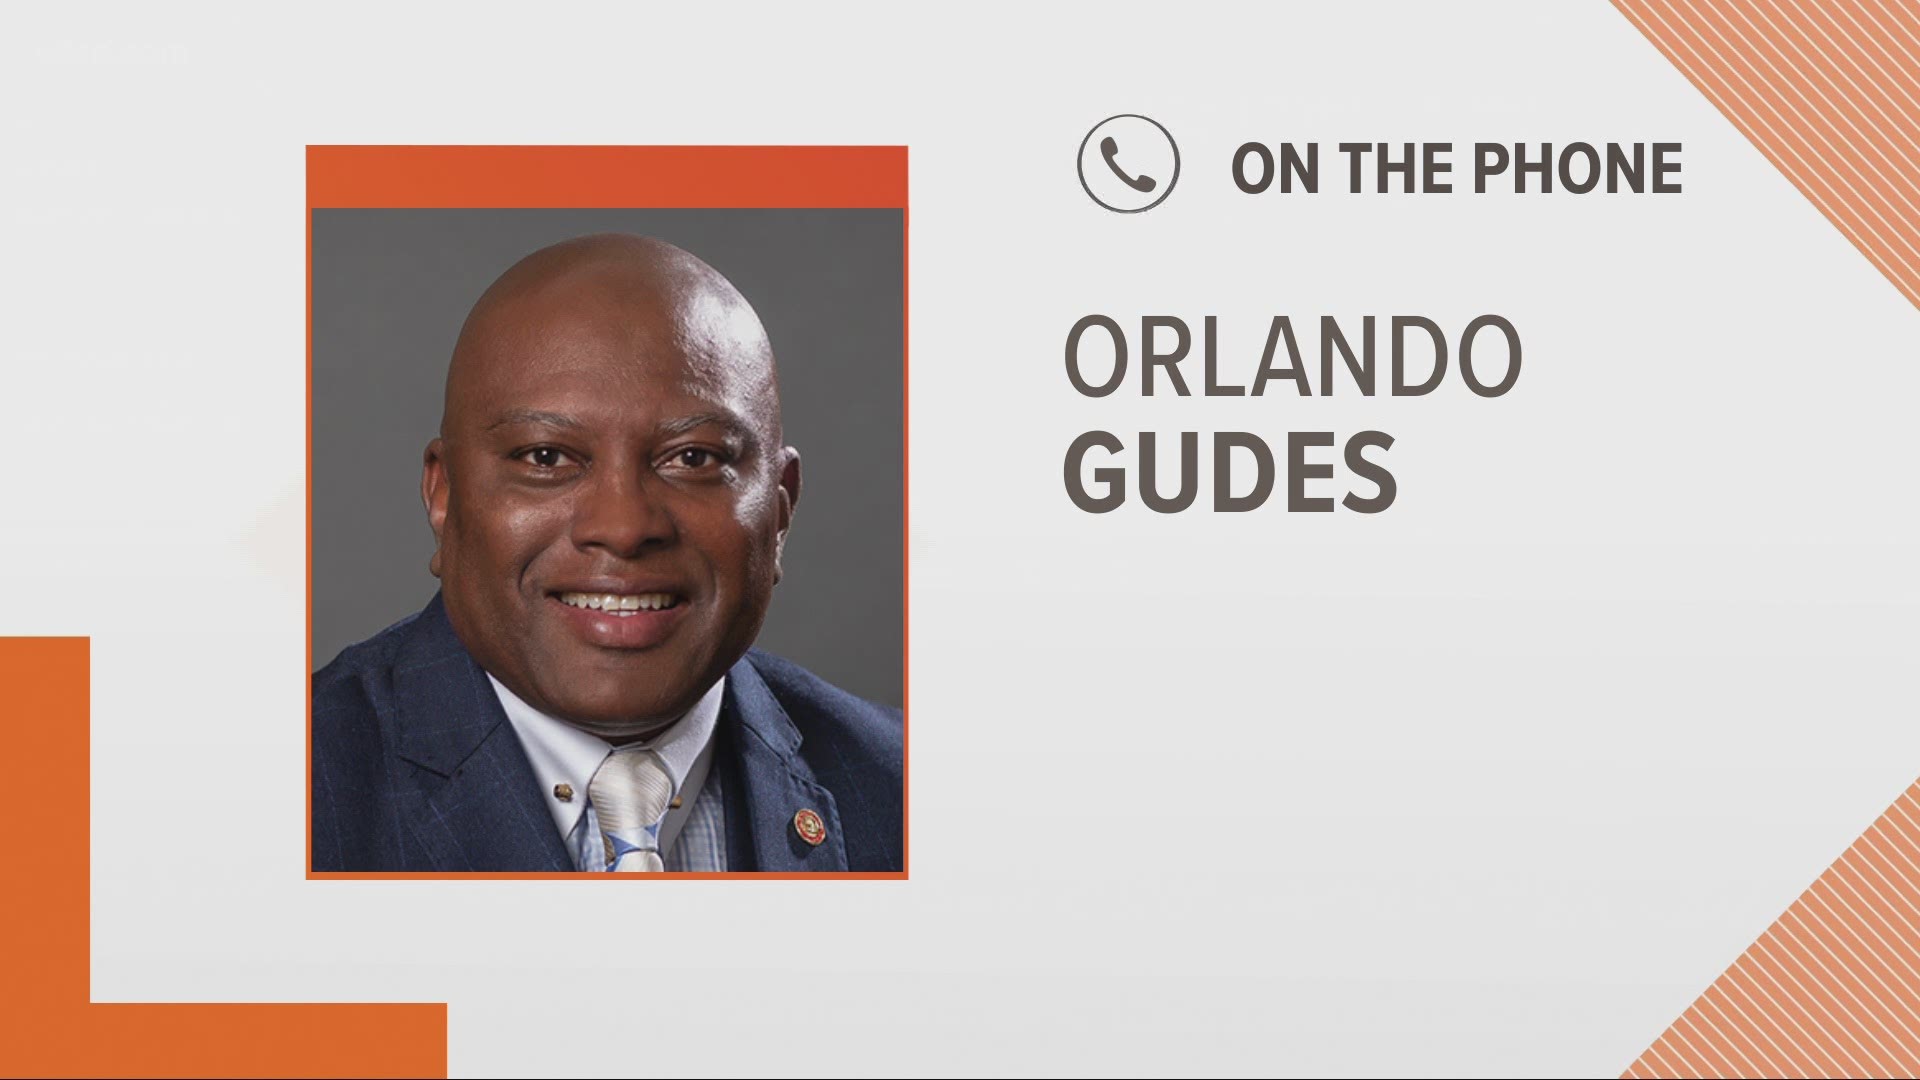 10 Tampa Bay spoke with Tampa Councilman Orlando Gudes on his thoughts on protests that turned destructive in the city Saturday.